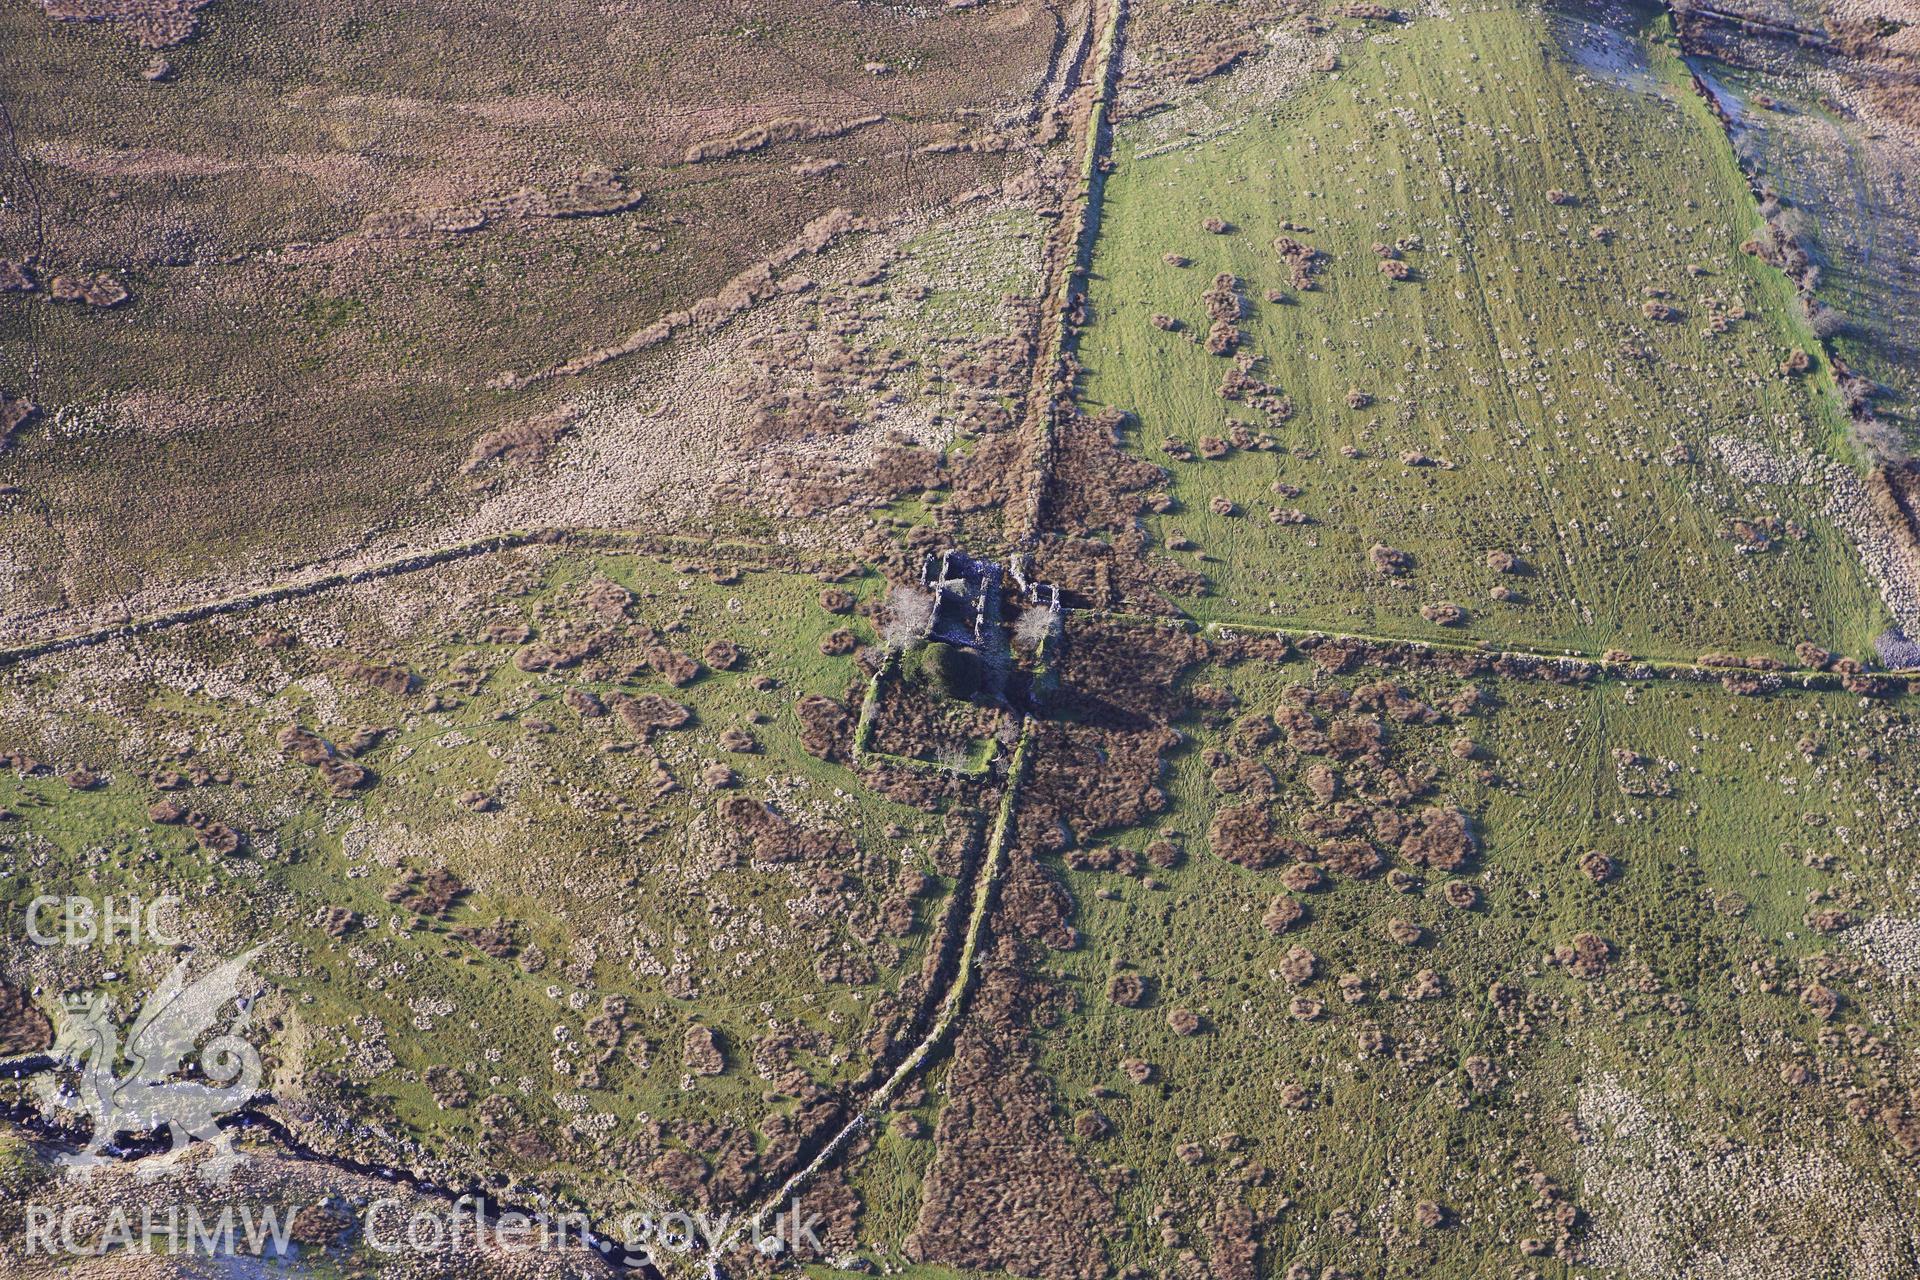 RCAHMW colour oblique photograph of Gwar Ffynnon, Deserted Famsteads. Taken by Toby Driver on 07/02/2012.